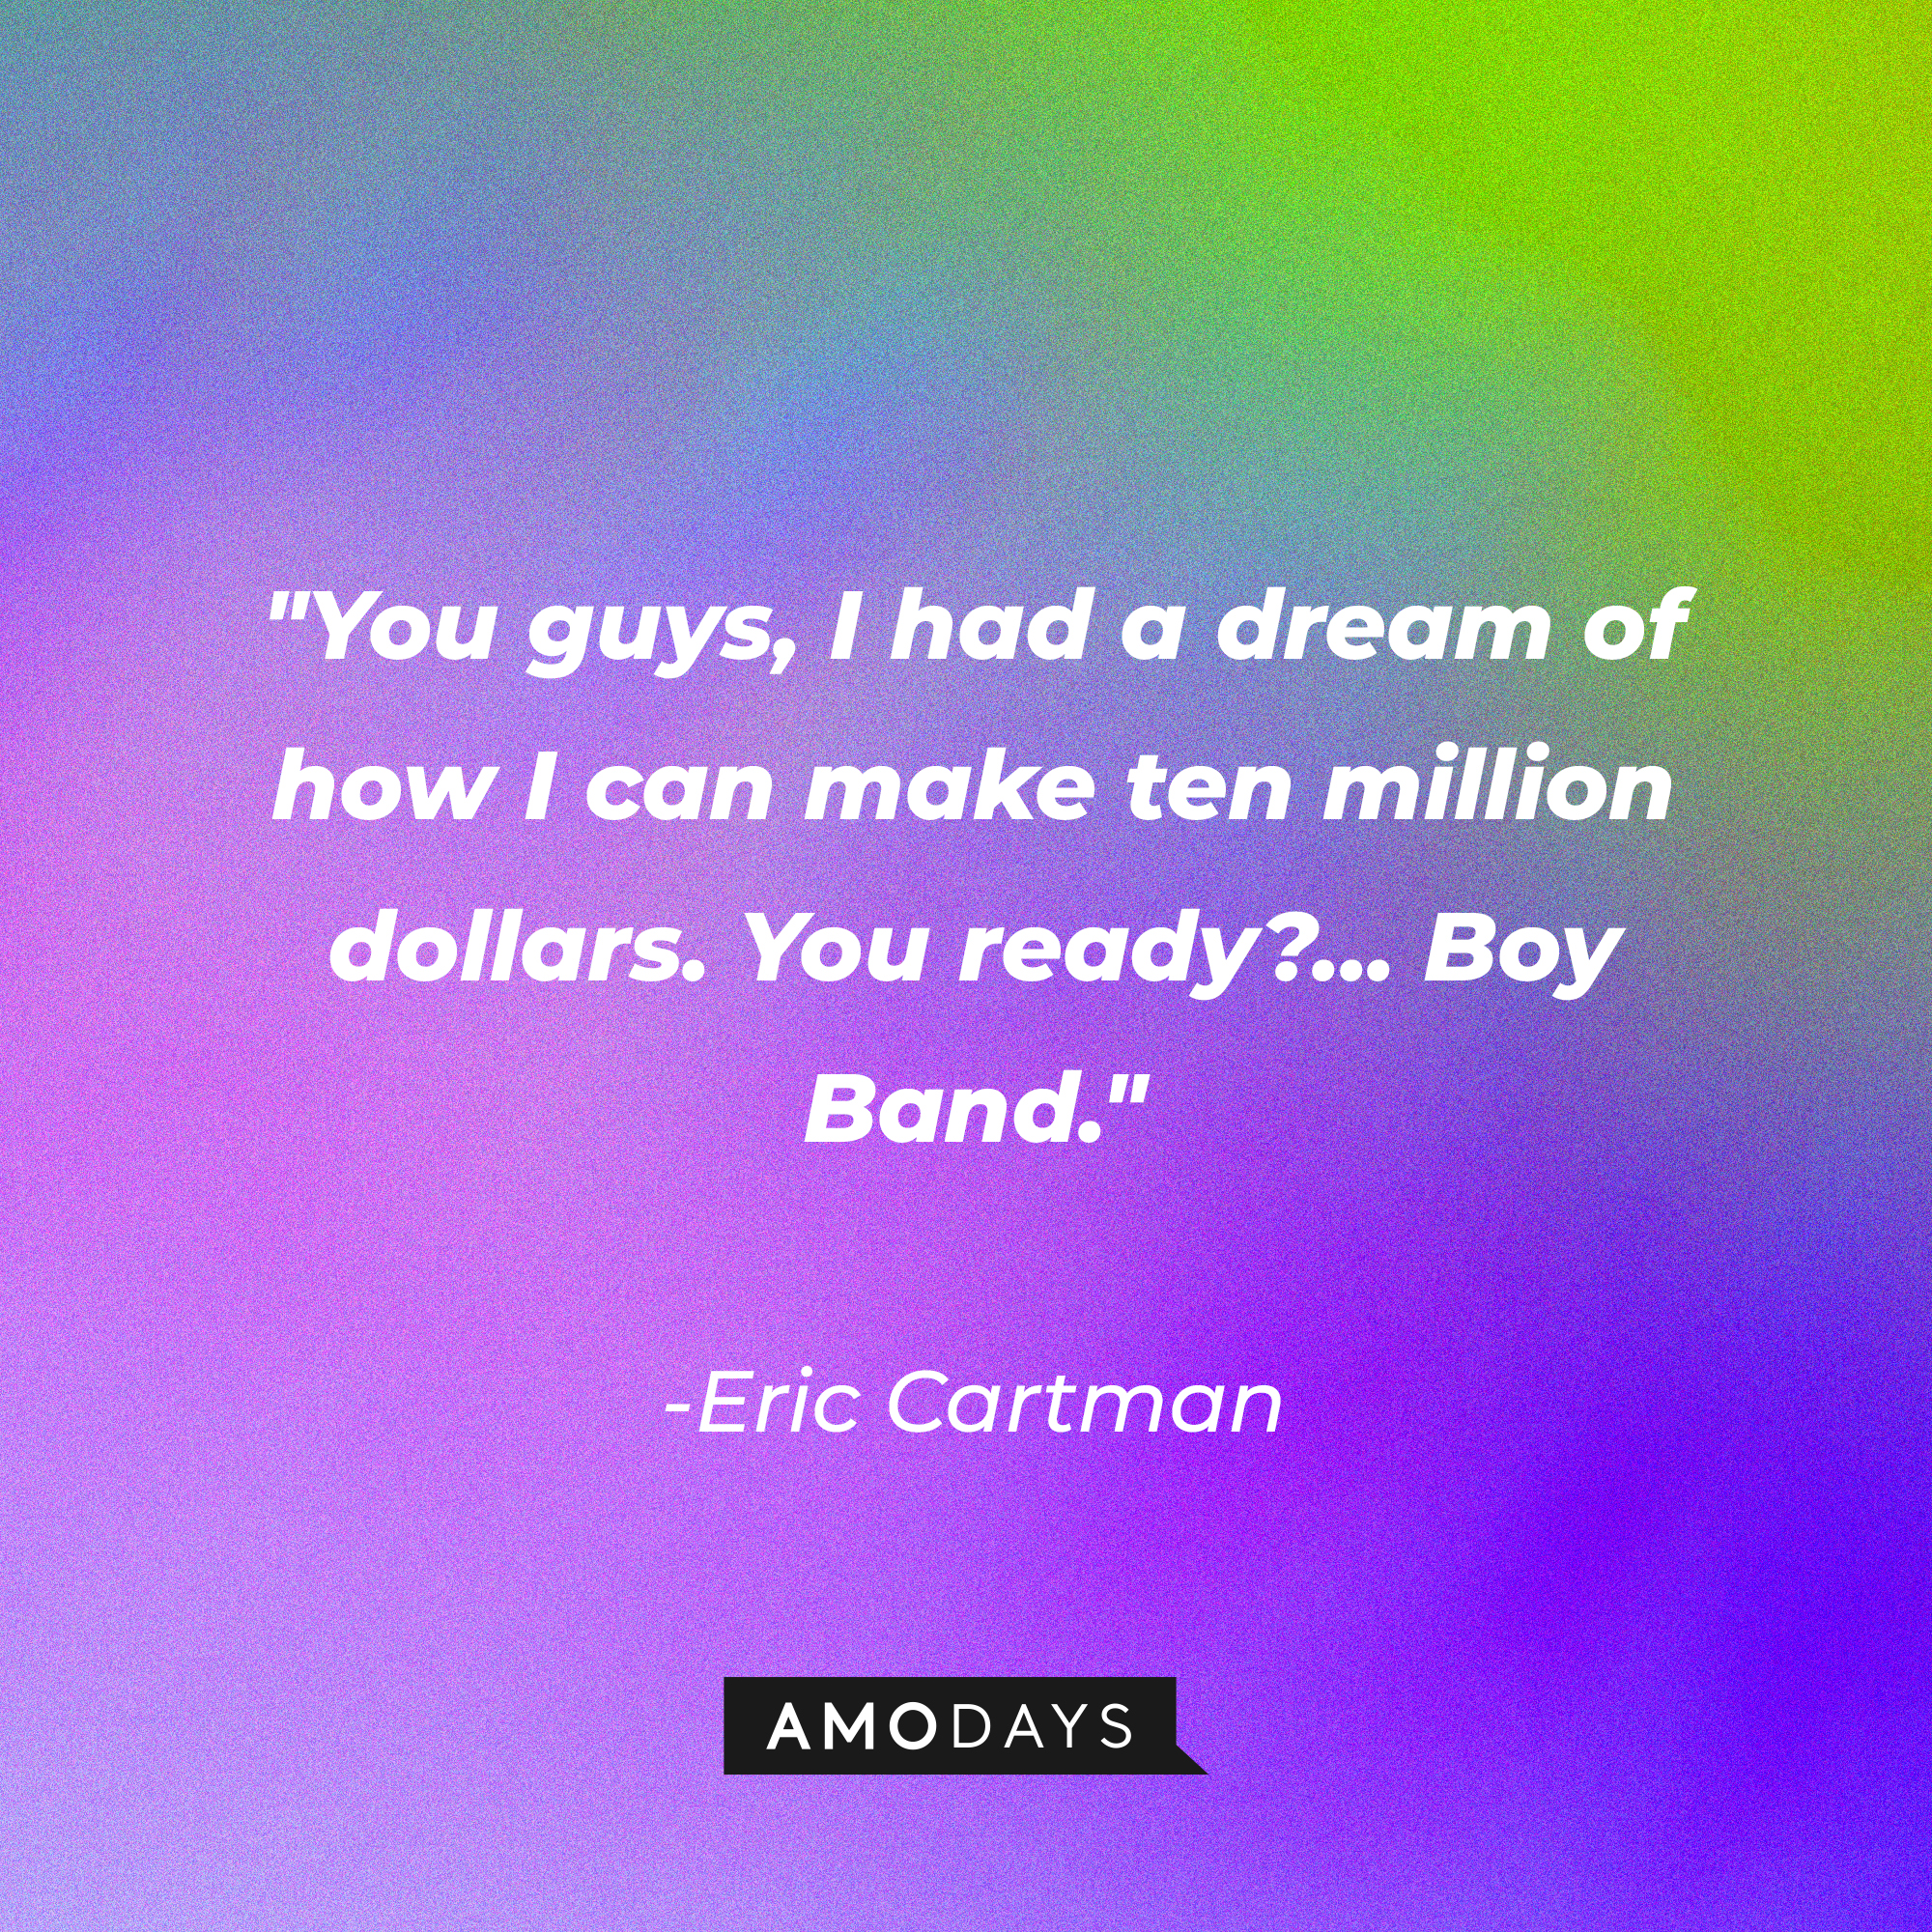 Eric Cartman's quote: "You guys, I had a dream of how I can make ten million dollars. You ready?... Boy Band." | Source: AmoDays